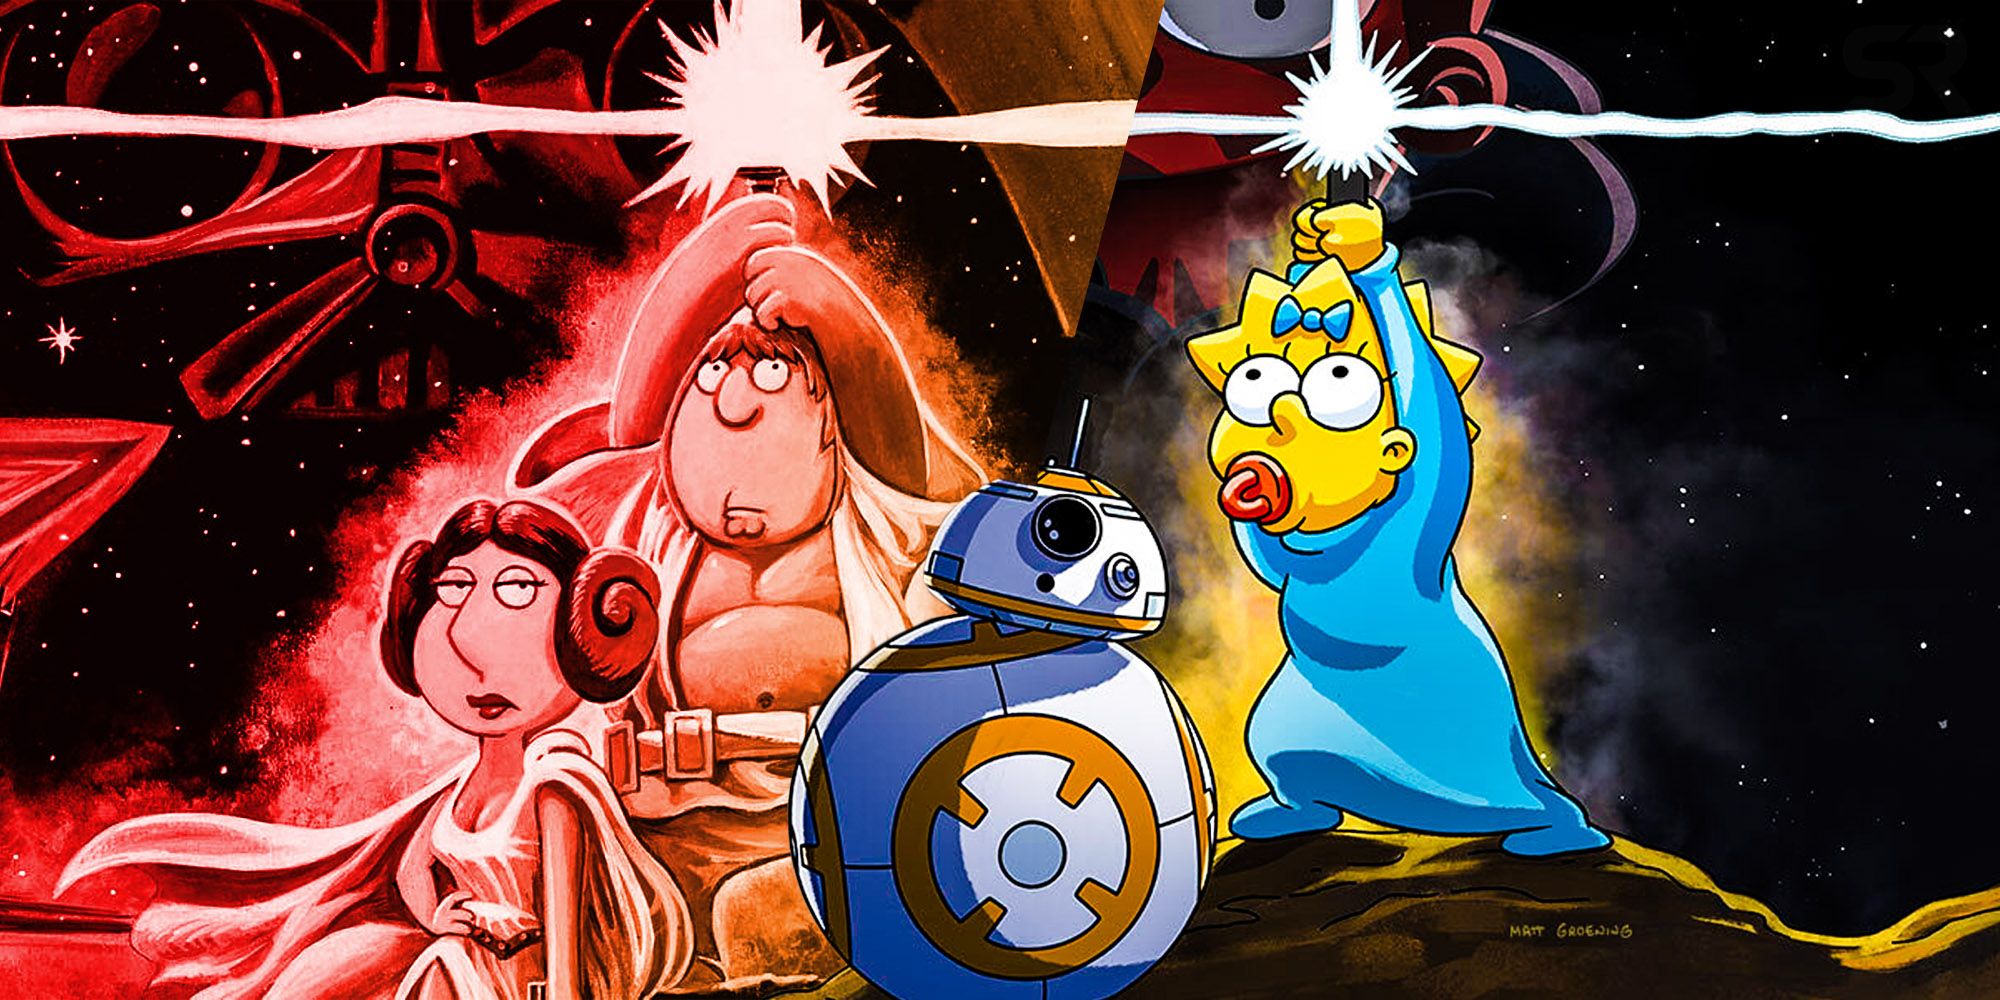 Why Family Guys Star Wars Parodies Are Better Than The Simpsons